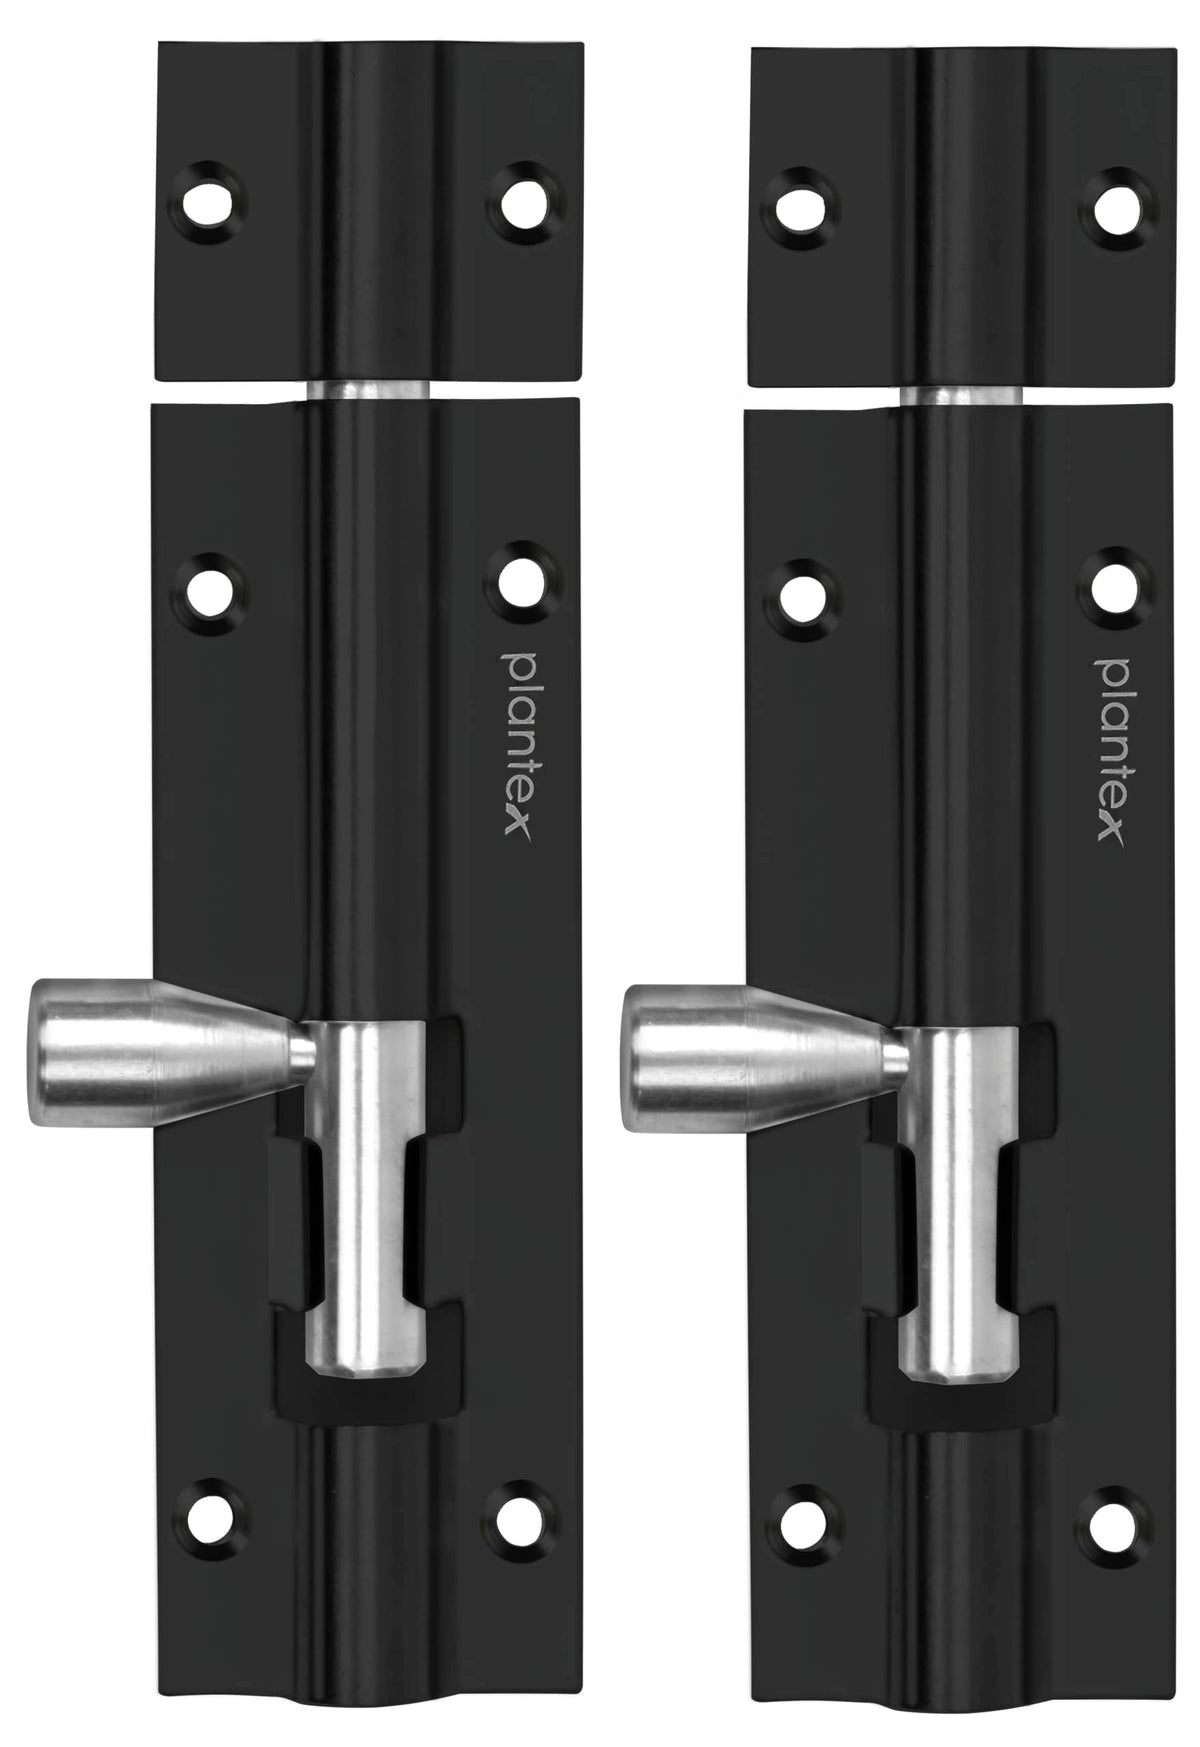 Plantex Multicolour Tower Bolt for Windows/Doors/Wardrobe - 4- inches (Pack of 2)